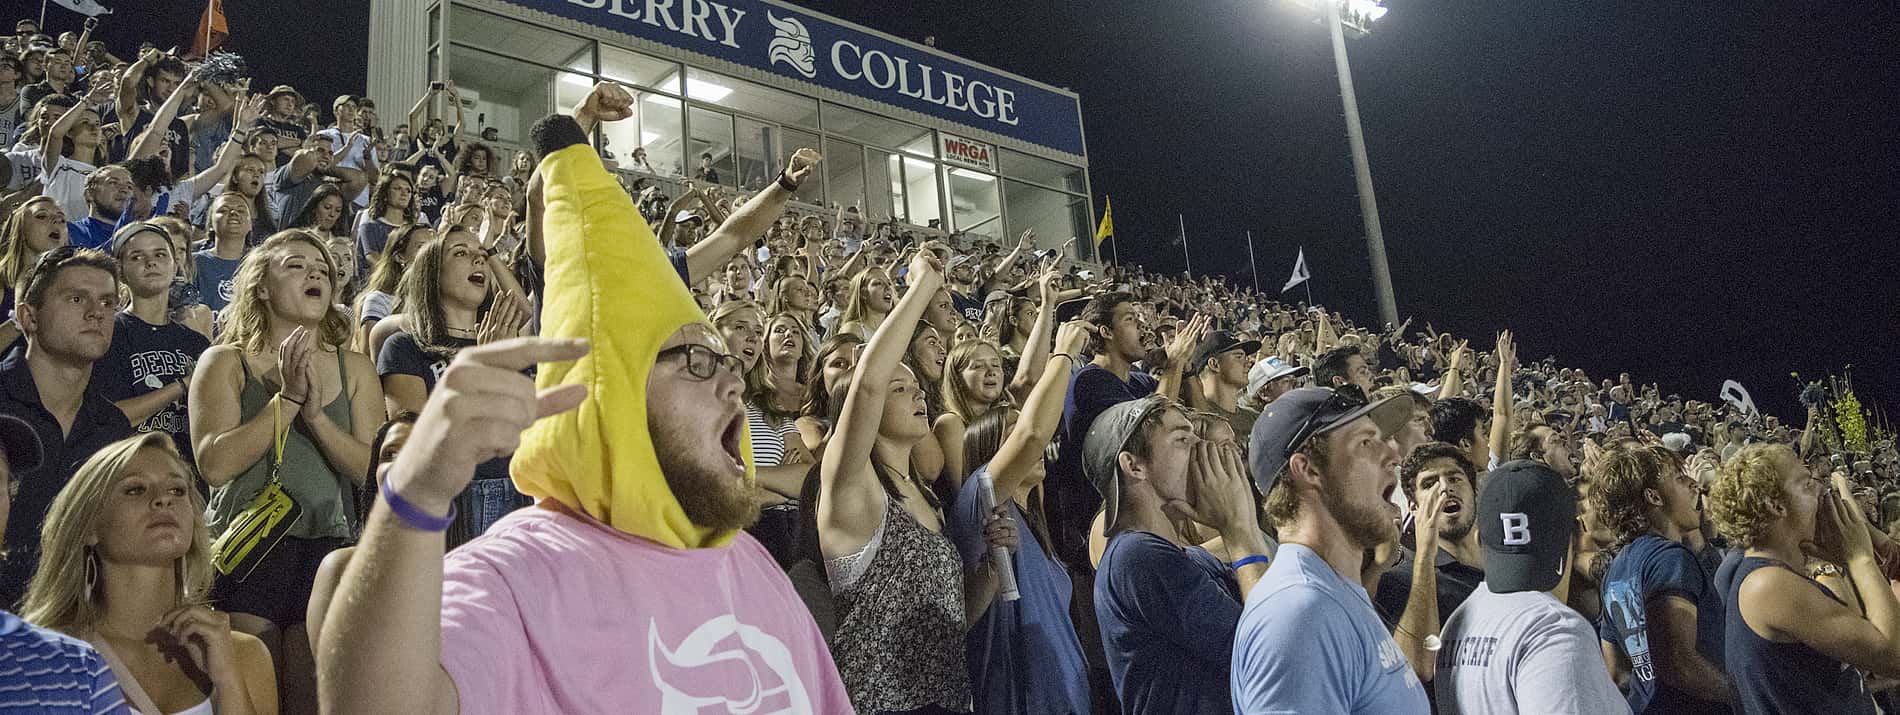 Berry College Activities and Organizations